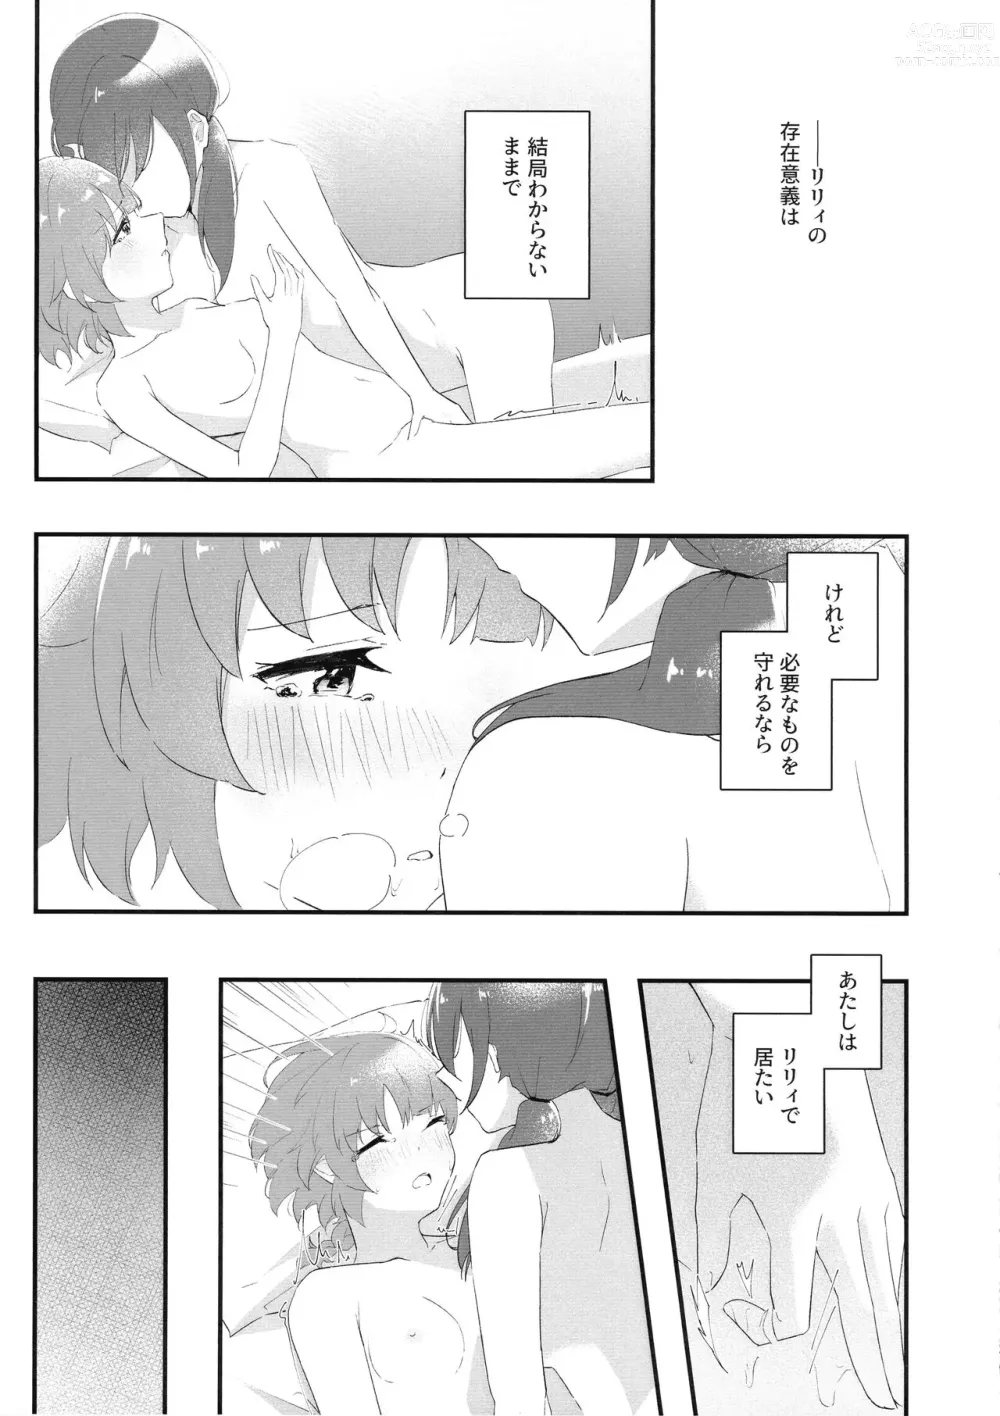 Page 16 of doujinshi Mabataki - without blink, could not find it